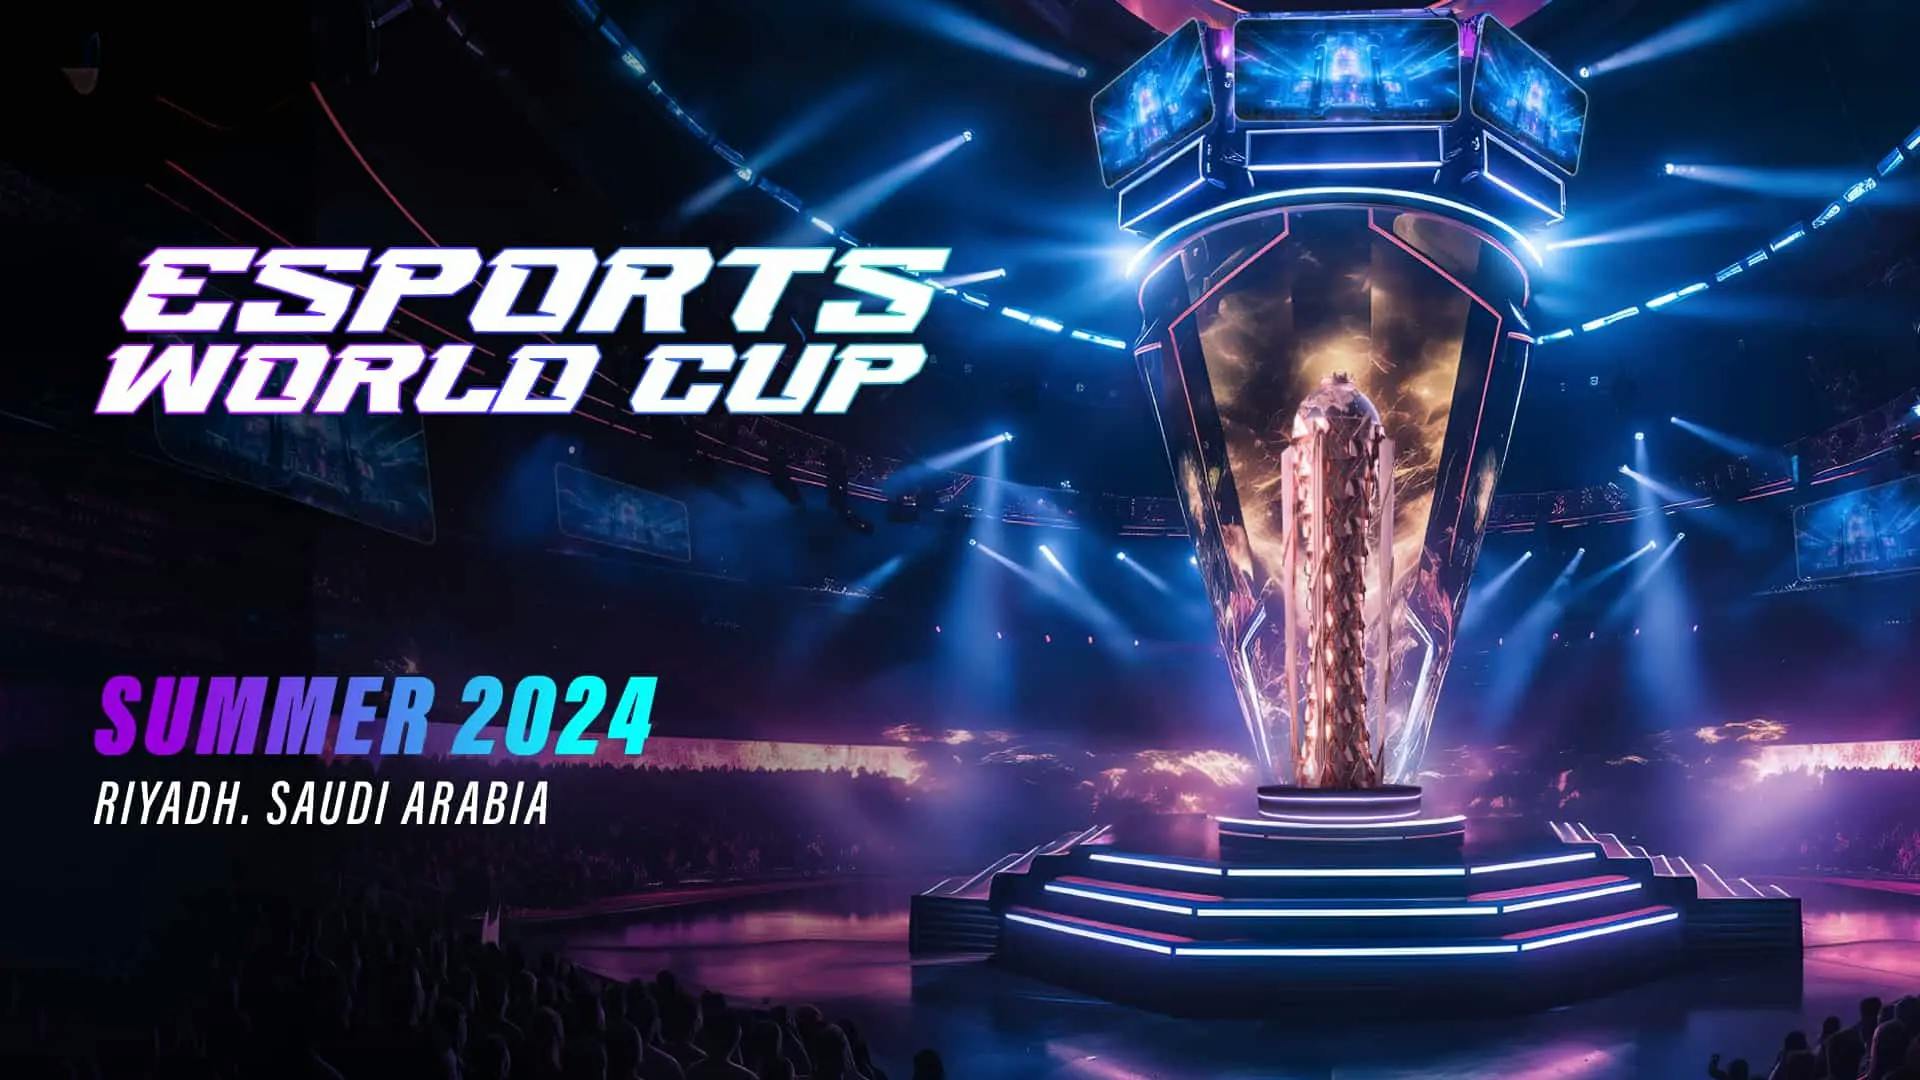 Esports World Cup 2024 to feature $60 Million prize pool